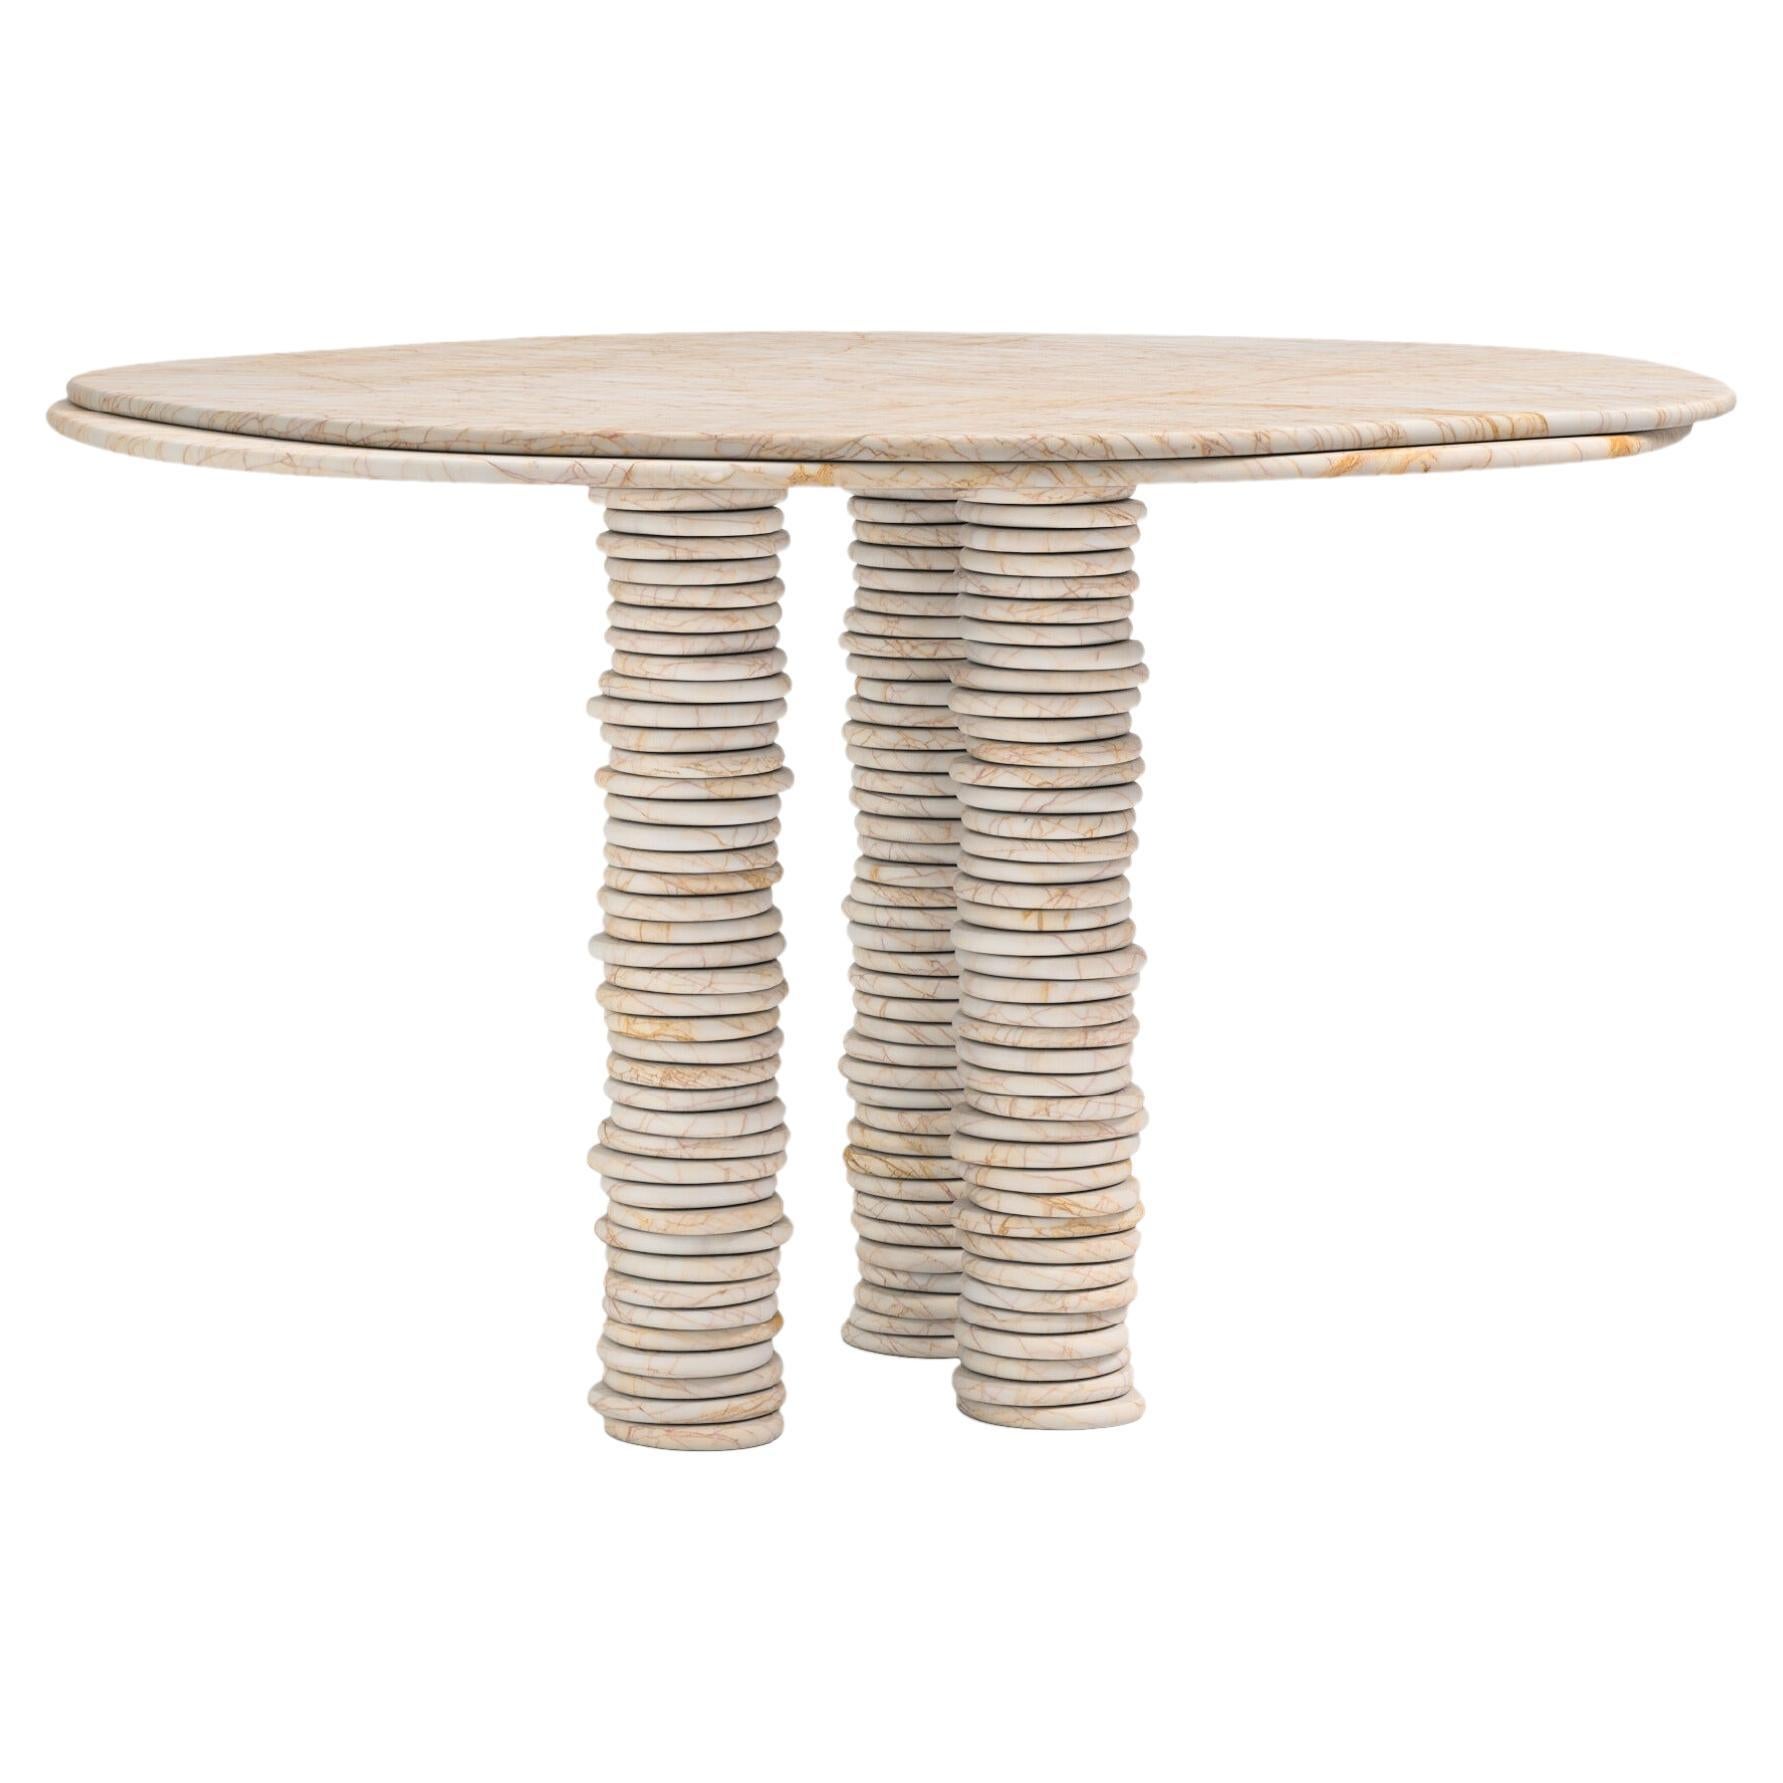 FORM(LA) Onda Round Dining Table 48”L x 48”W x 29”H Golden Spider Marble For Sale